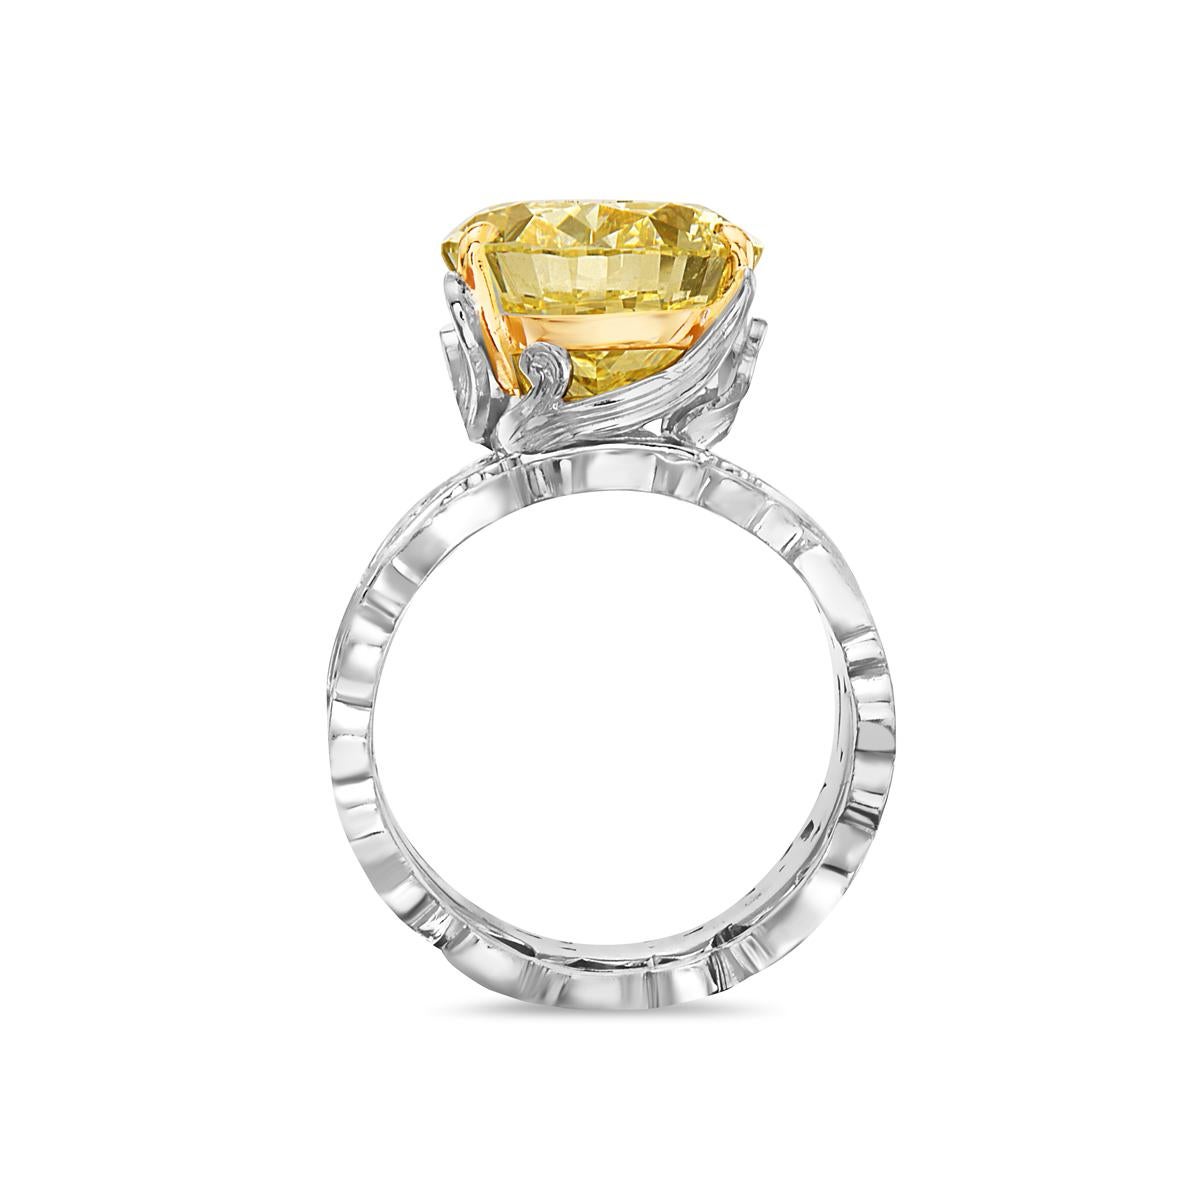 This engagement ring features a 13.11 carat fancy yellow VVS2 oval diamond set in a platinum and 18K yellow gold barouque style setting with matching band. GIA Certified. Report No. 5191115266. Size 8. 

Resizeable upon request.

Viewings available